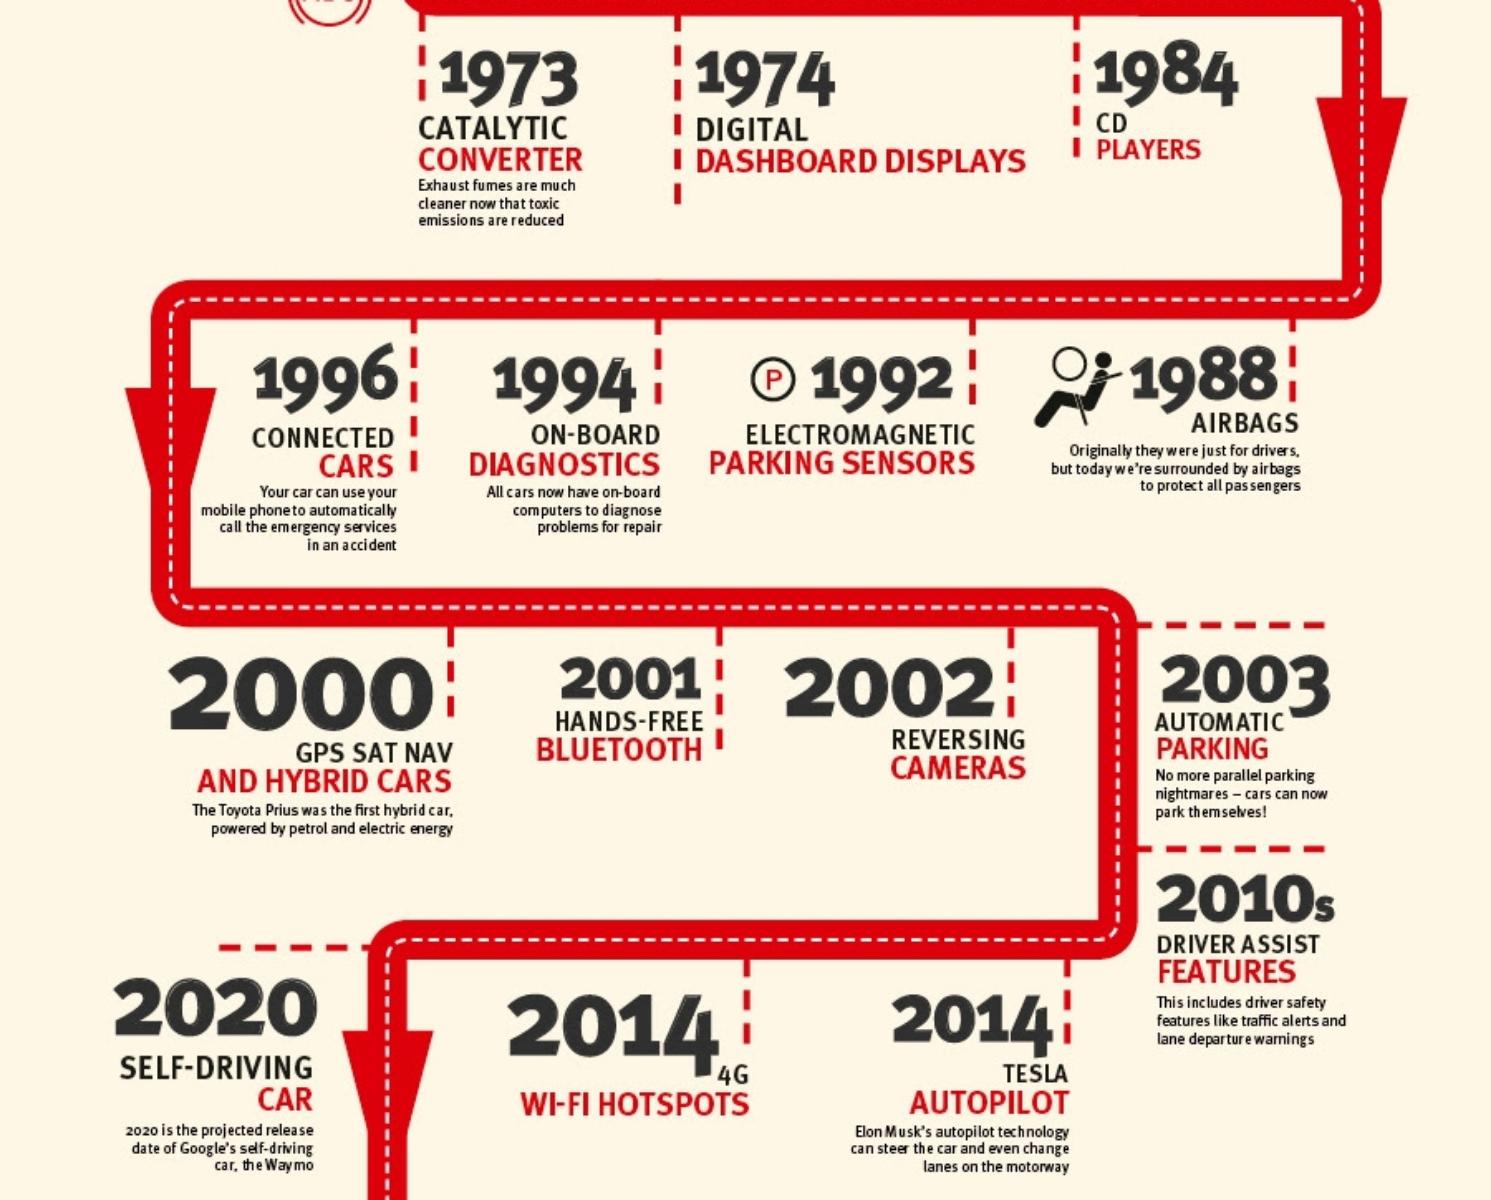 The timeline infographic: 1973 to 2020